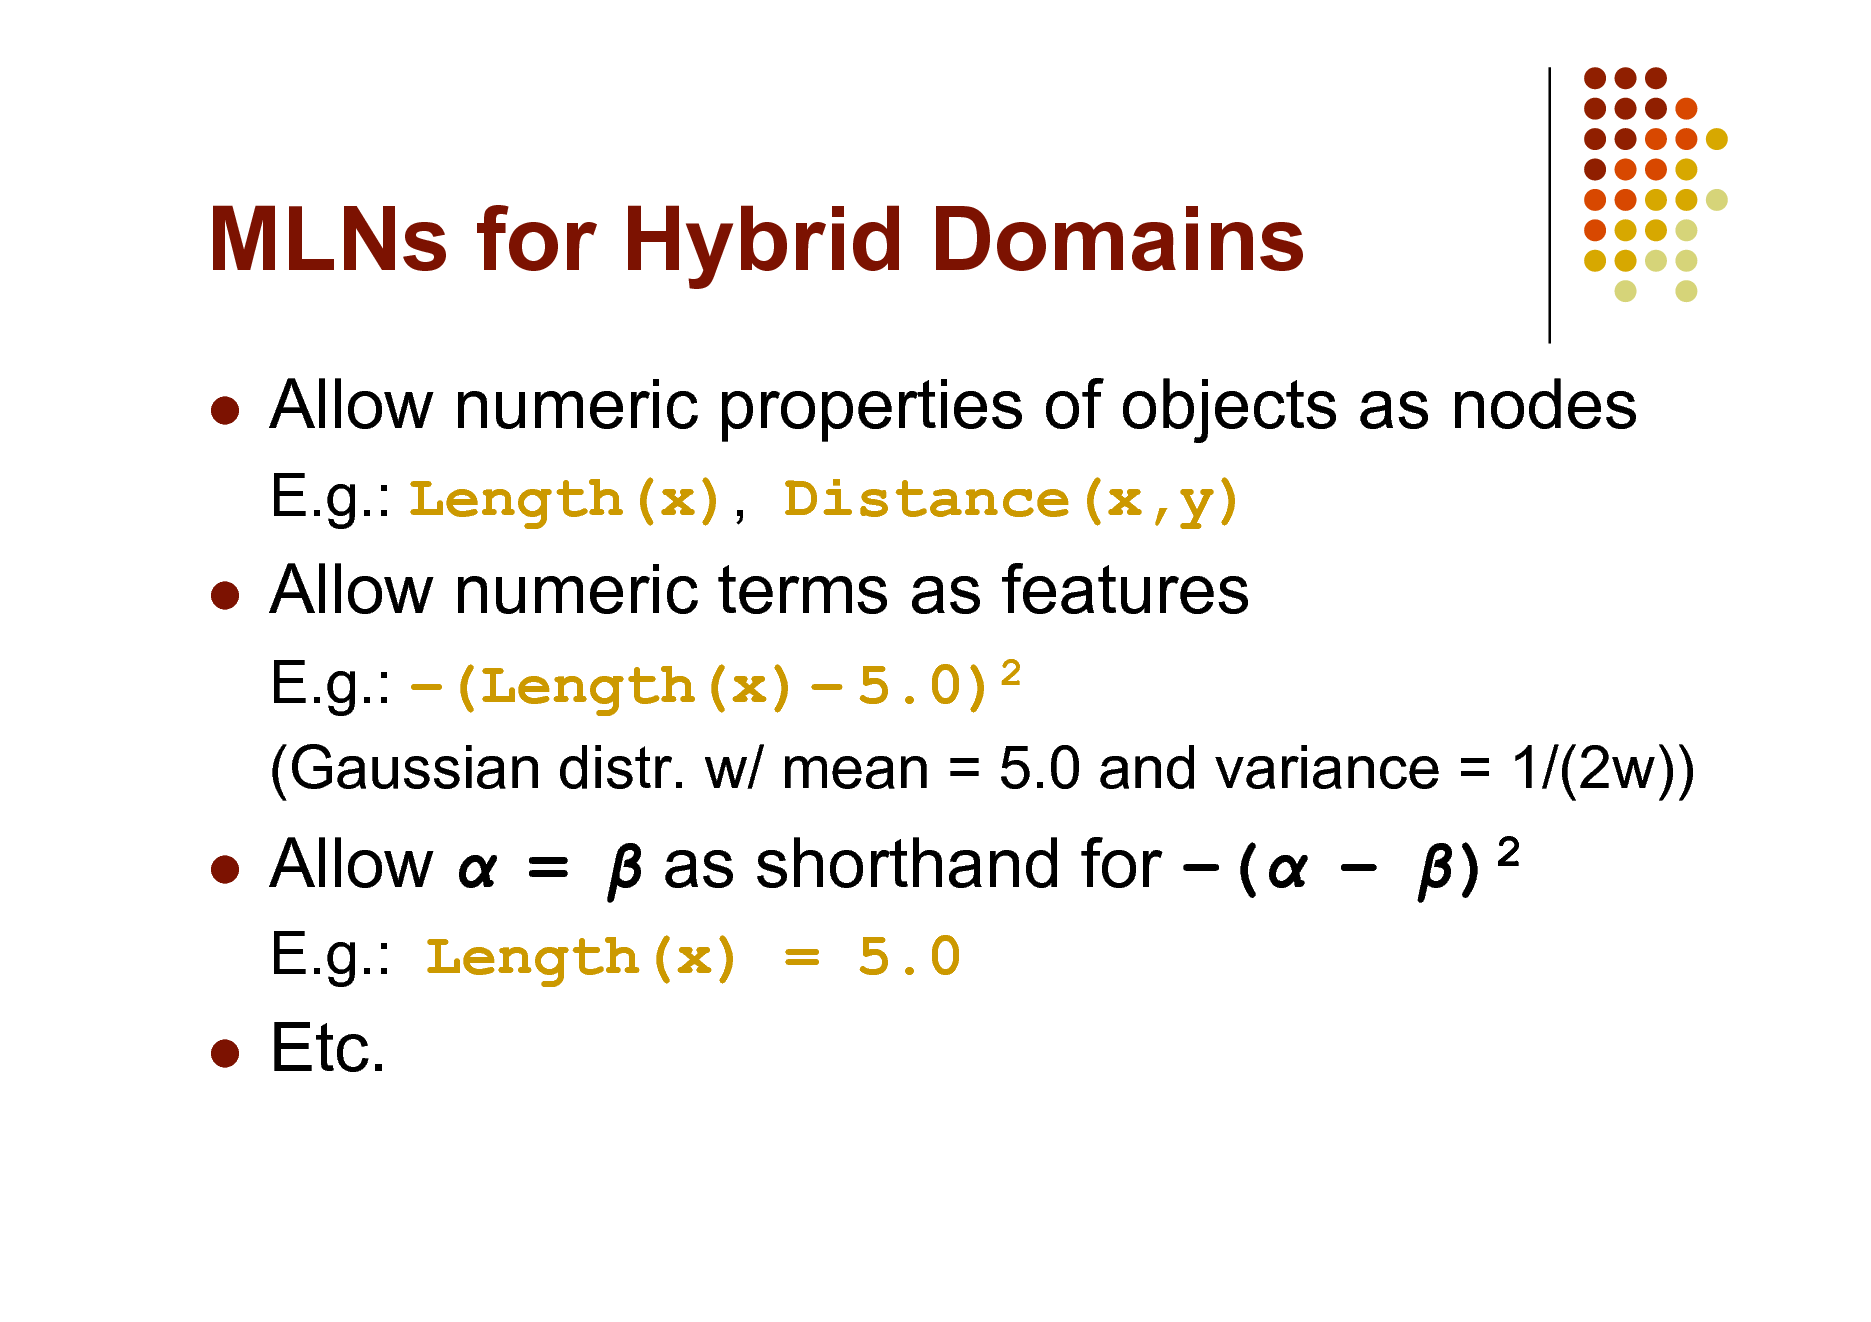 Slide: MLNs for Hybrid Domains


Allow numeric properties of objects as nodes
E.g.: Length(x), Distance(x,y)



Allow numeric terms as features
E.g.: (Length(x)  5.0)2 (Gaussian distr. w/ mean = 5.0 and variance = 1/(2w))



Allow  =  as shorthand for (  )2
E.g.: Length(x) = 5.0



Etc.

